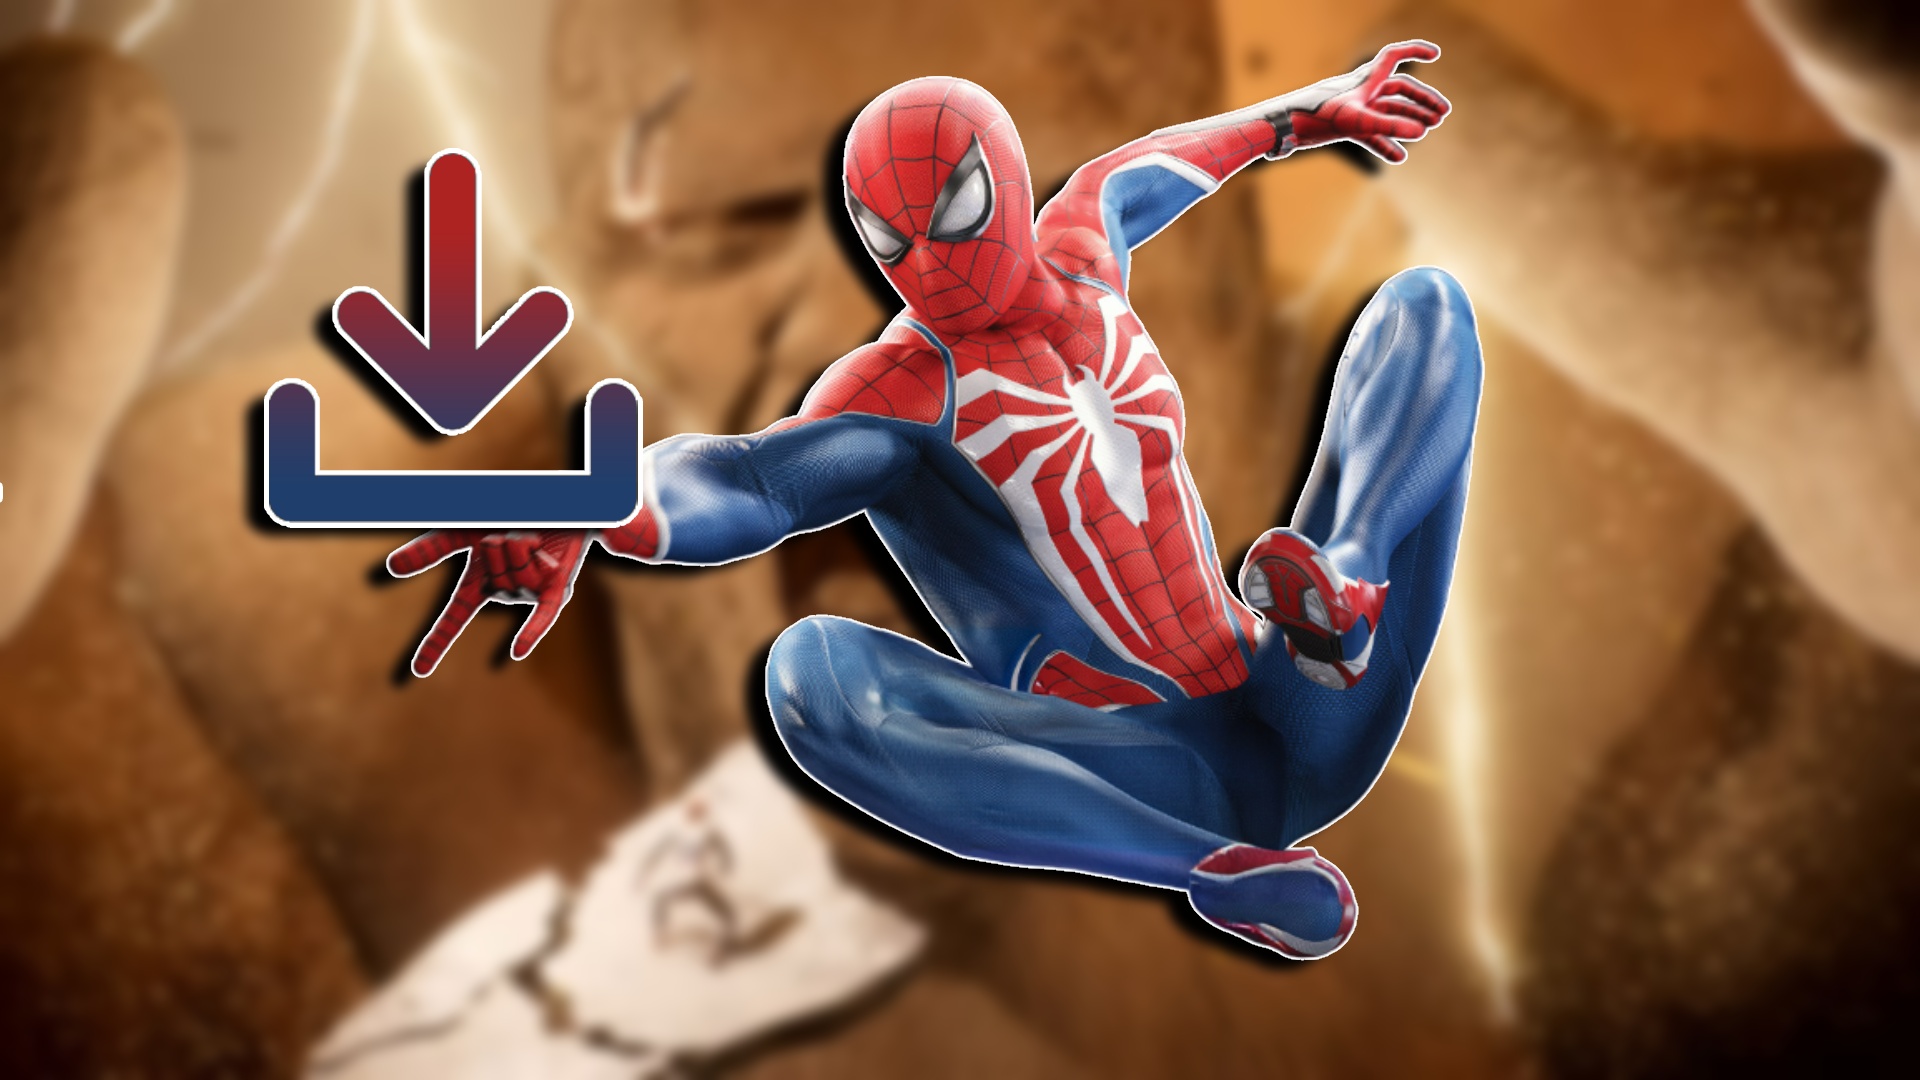 How Long is 'Marvel's Spider-Man 2'? Find Out Here - News